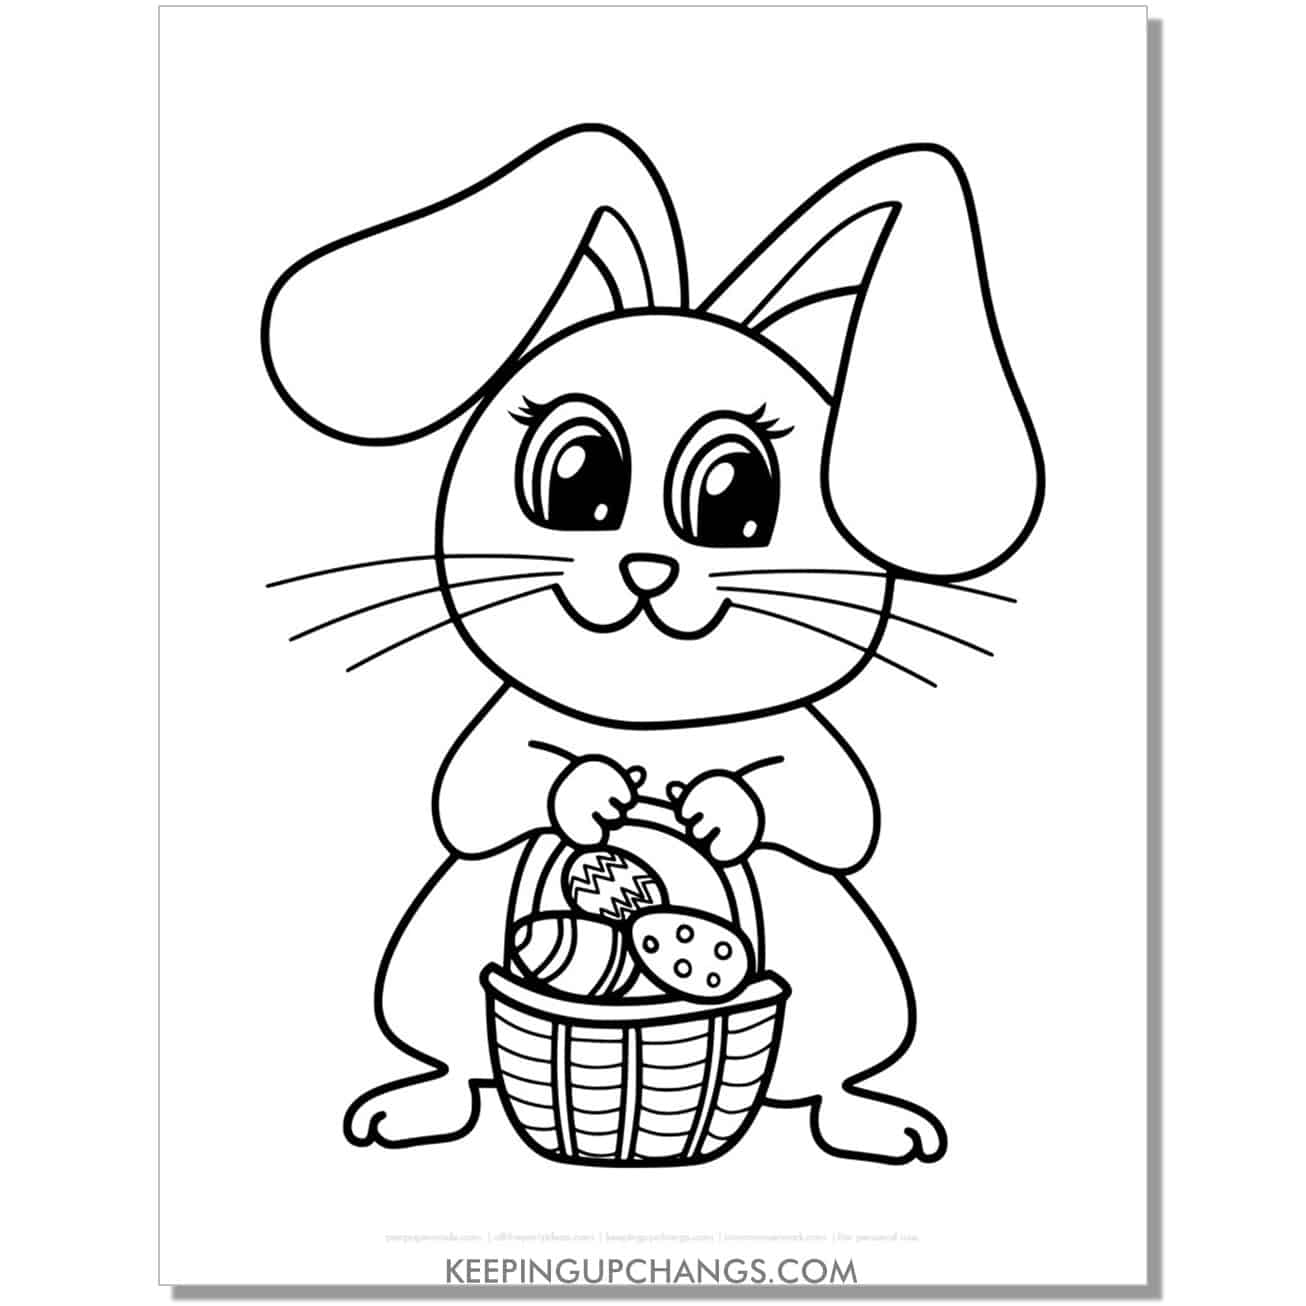 kawaii easter bunny with basket of eggs coloring page, sheet.